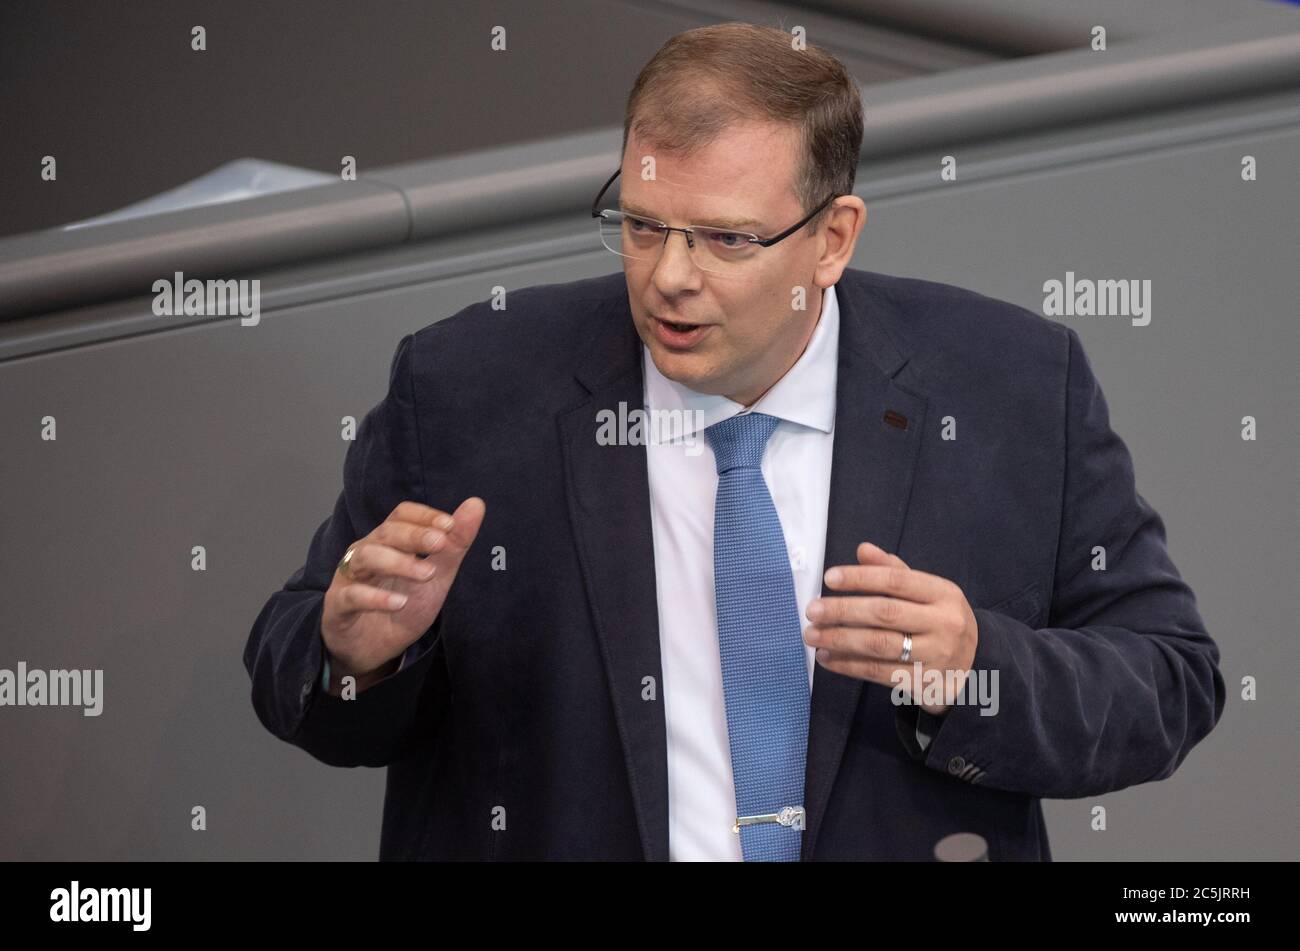 Berlin, Germany. 03rd July, 2020. Ulrich Lechte (FDP) speaks in the plenary session of the German Bundestag. The main topics of the 171st session of the 19th legislative period are the adoption of the Coal Exit Act, a topical hour on the excesses of violence in Stuttgart, as well as debates on electoral law reform, the protection of electronic patient data, the welfare of farm animals and the German chairmanship of the UN Security Council. Credit: Christophe Gateau/dpa/Alamy Live News Stock Photo